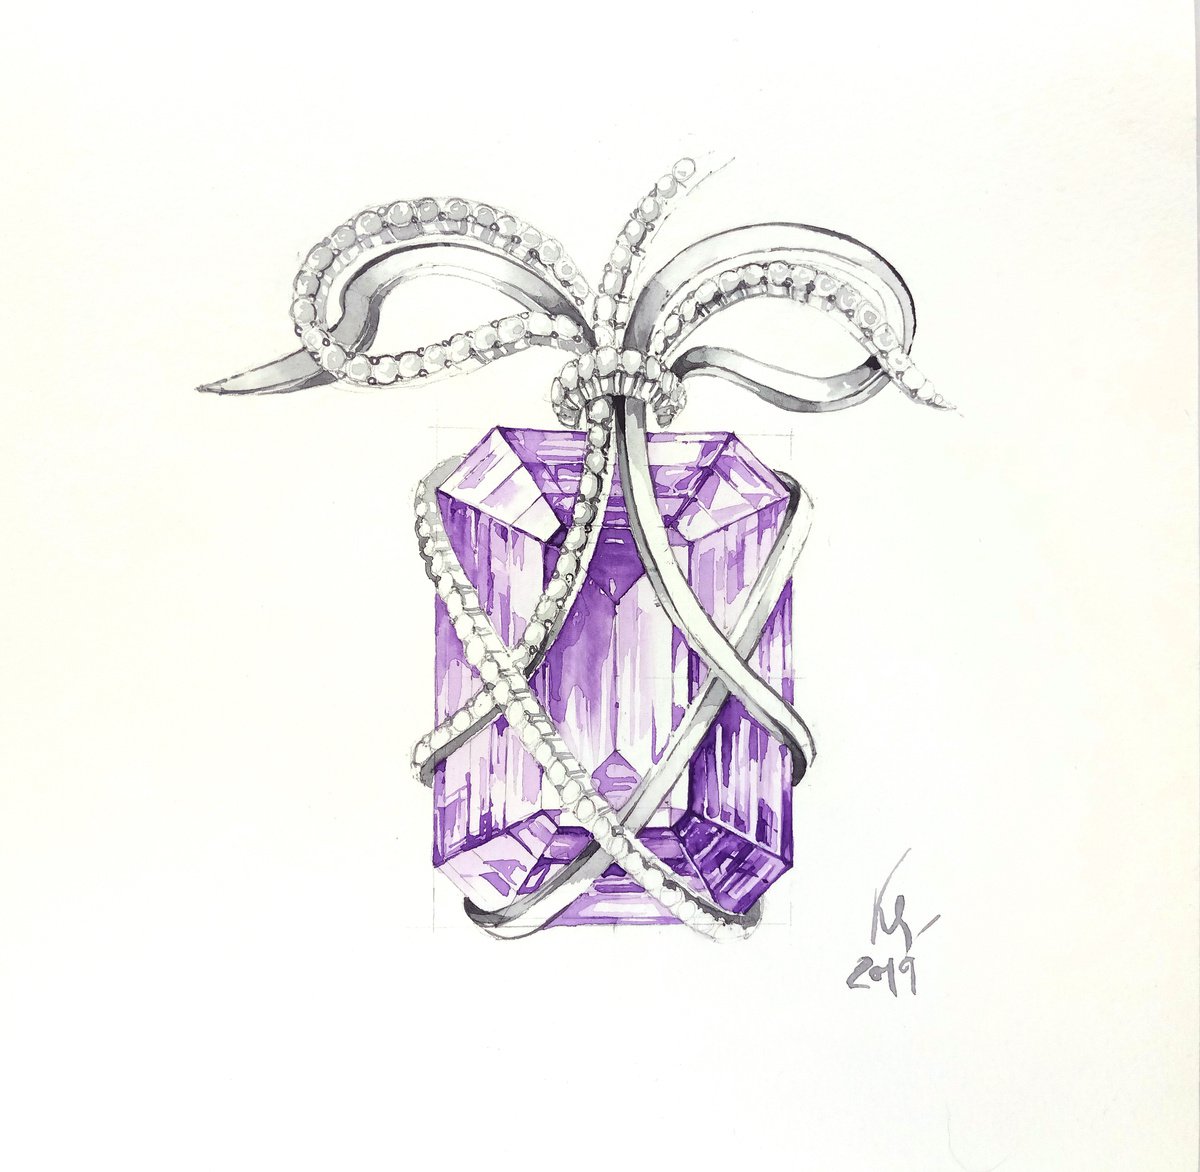 Jewelry watercolor sketch Necklace with faceted amethyst stone by Ksenia Selianko